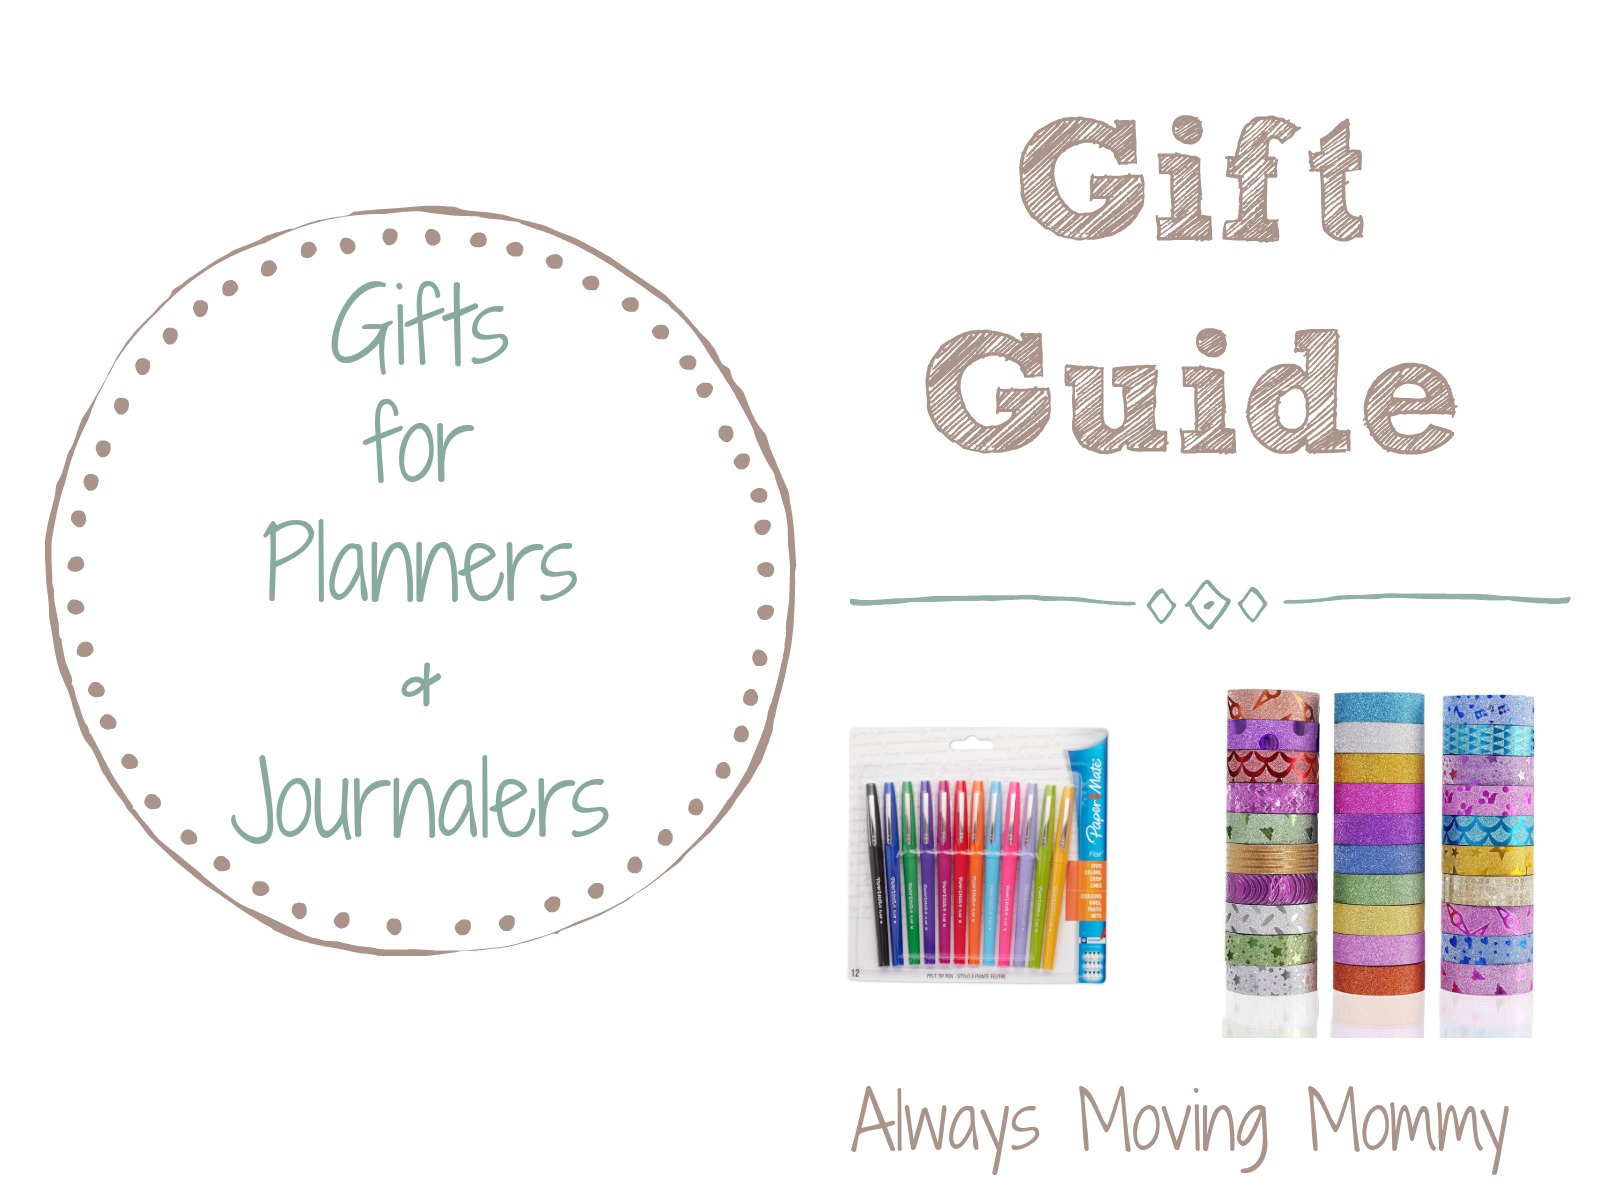 Gift Guide: Gift Ideas for Planners and Journalers | Always Moving Mommy | Need gift ideas for someone who loves planning and list making? This is the gift guide for you